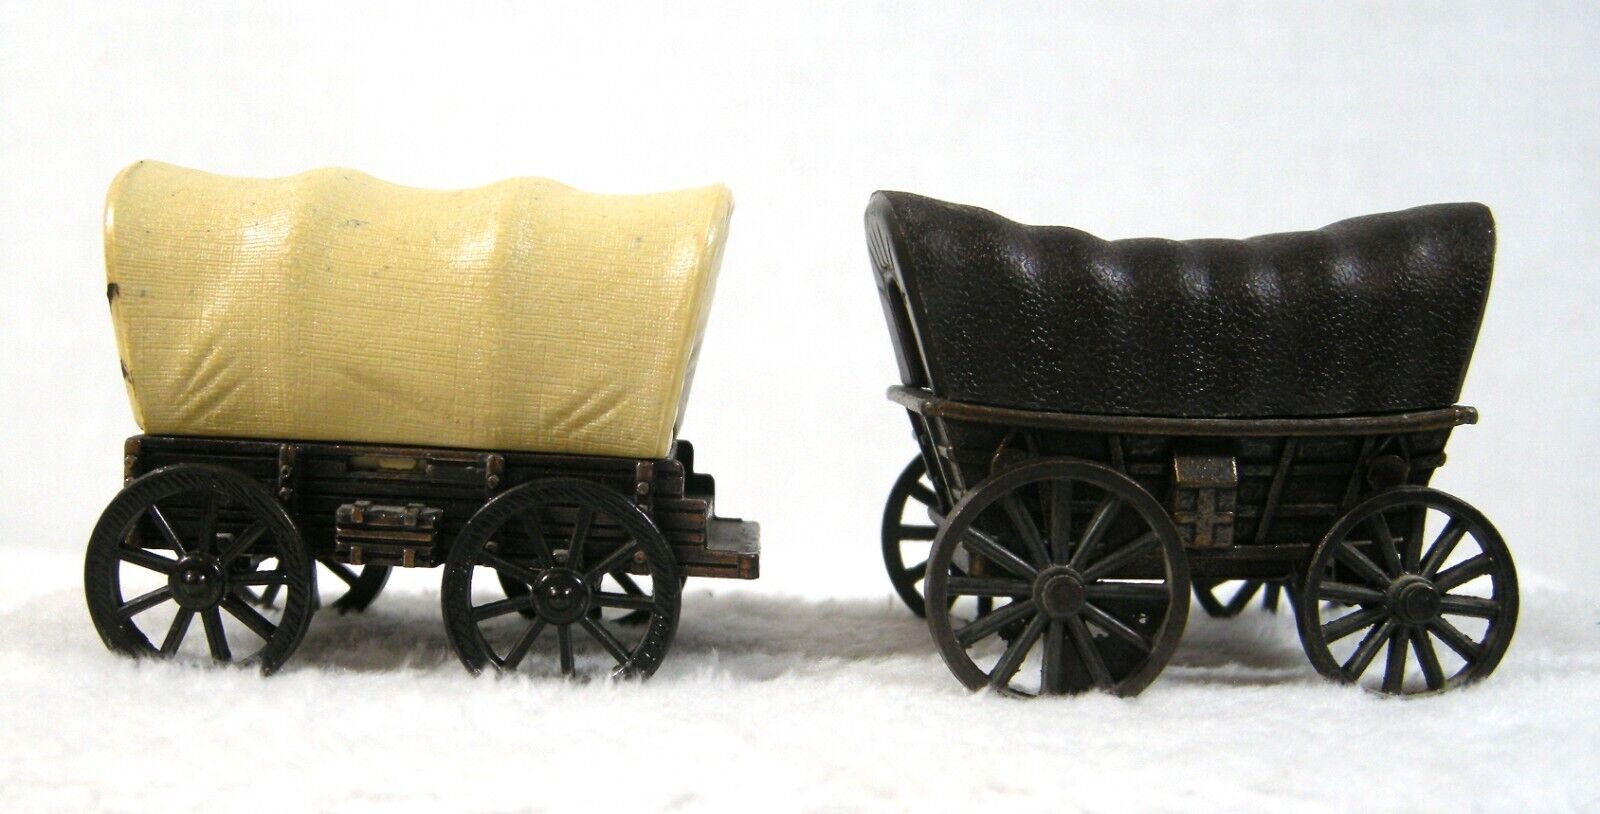 Lot of two Vintage Miniature Diecast Pencil Sharpeners COVERED WAGONS